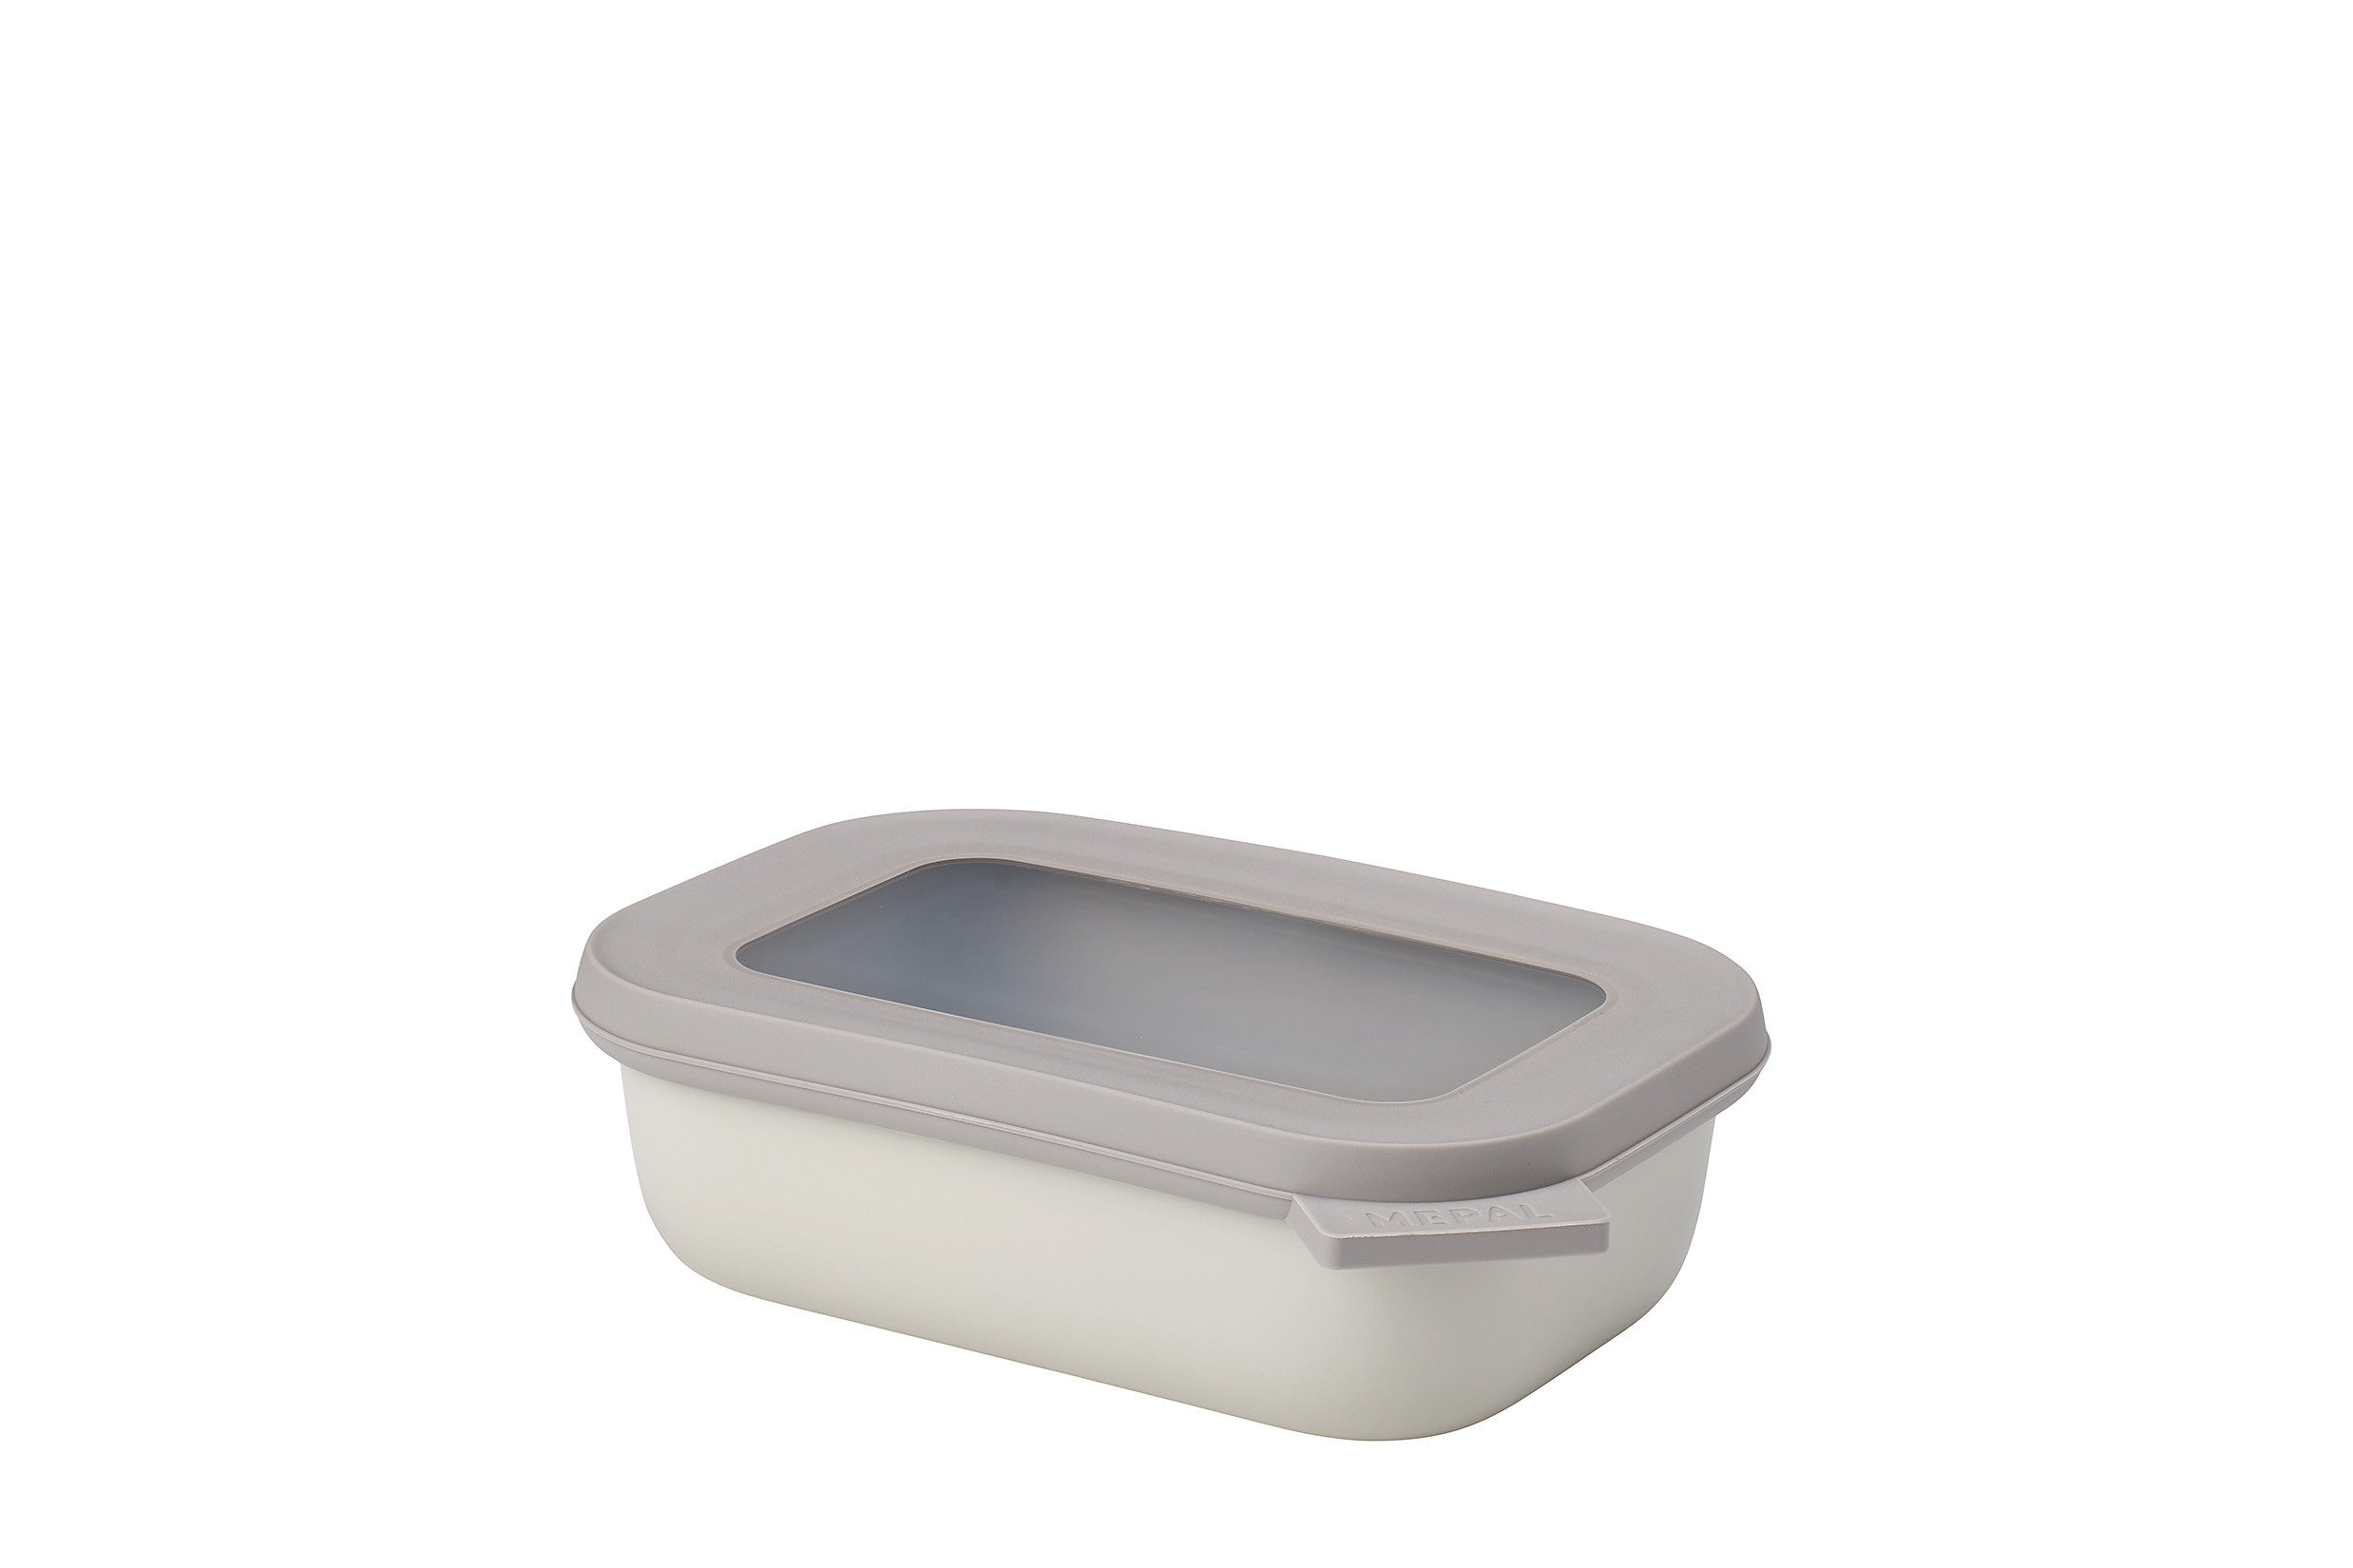 Cirqula 500mL Freezer Container Nordic White - KITCHEN - Food Containers - Soko and Co